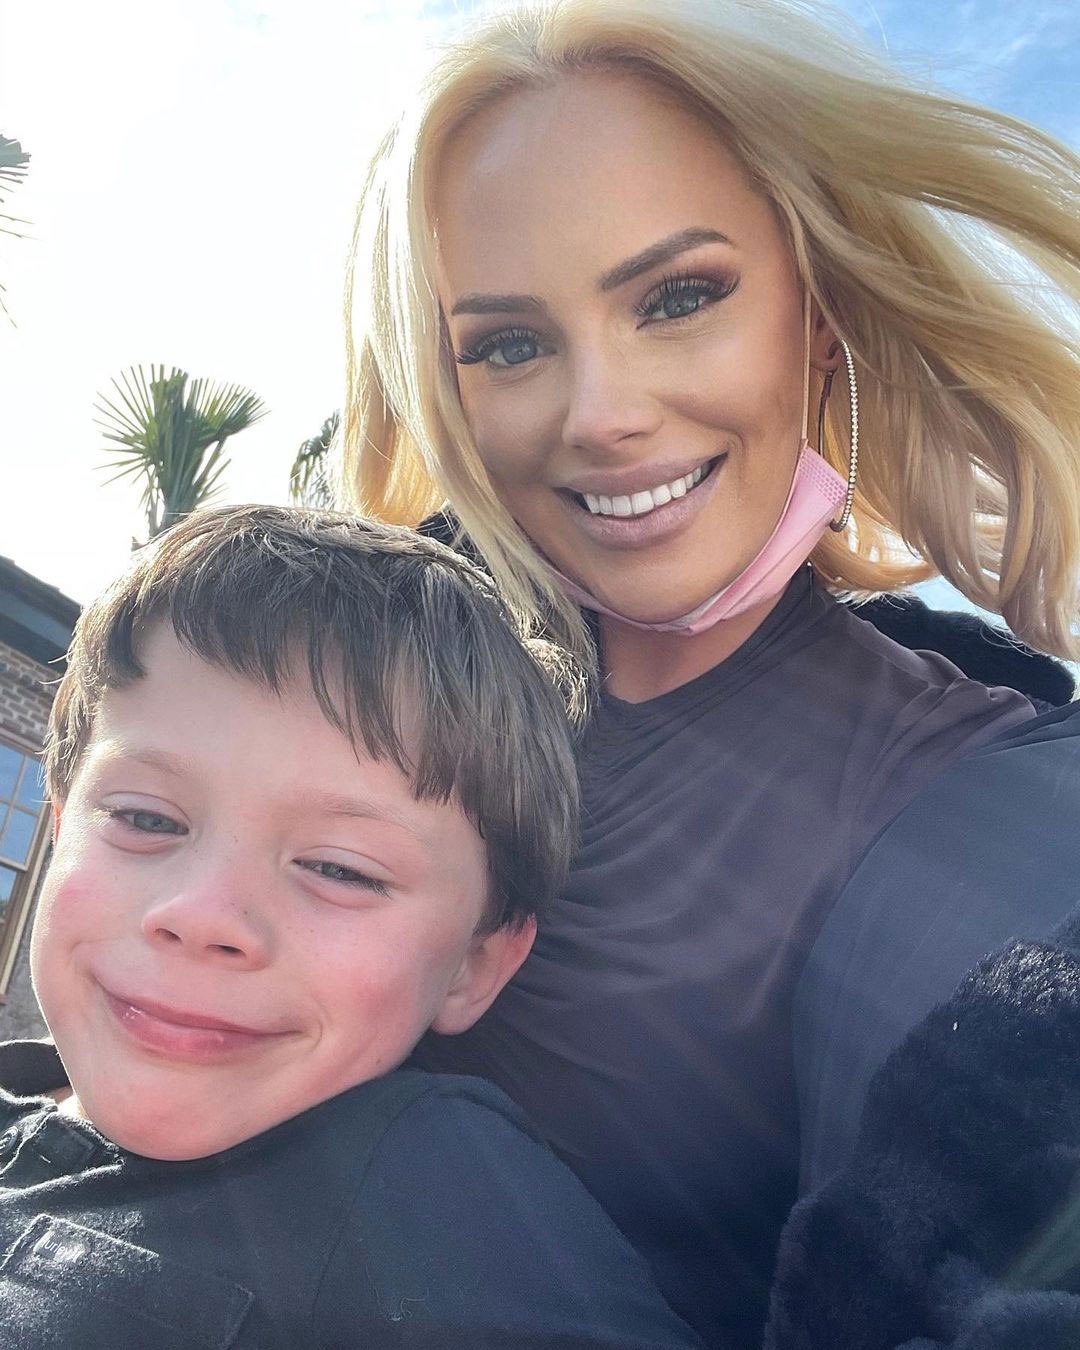 Southern Charm star Kathryn Dennis shares photo with son